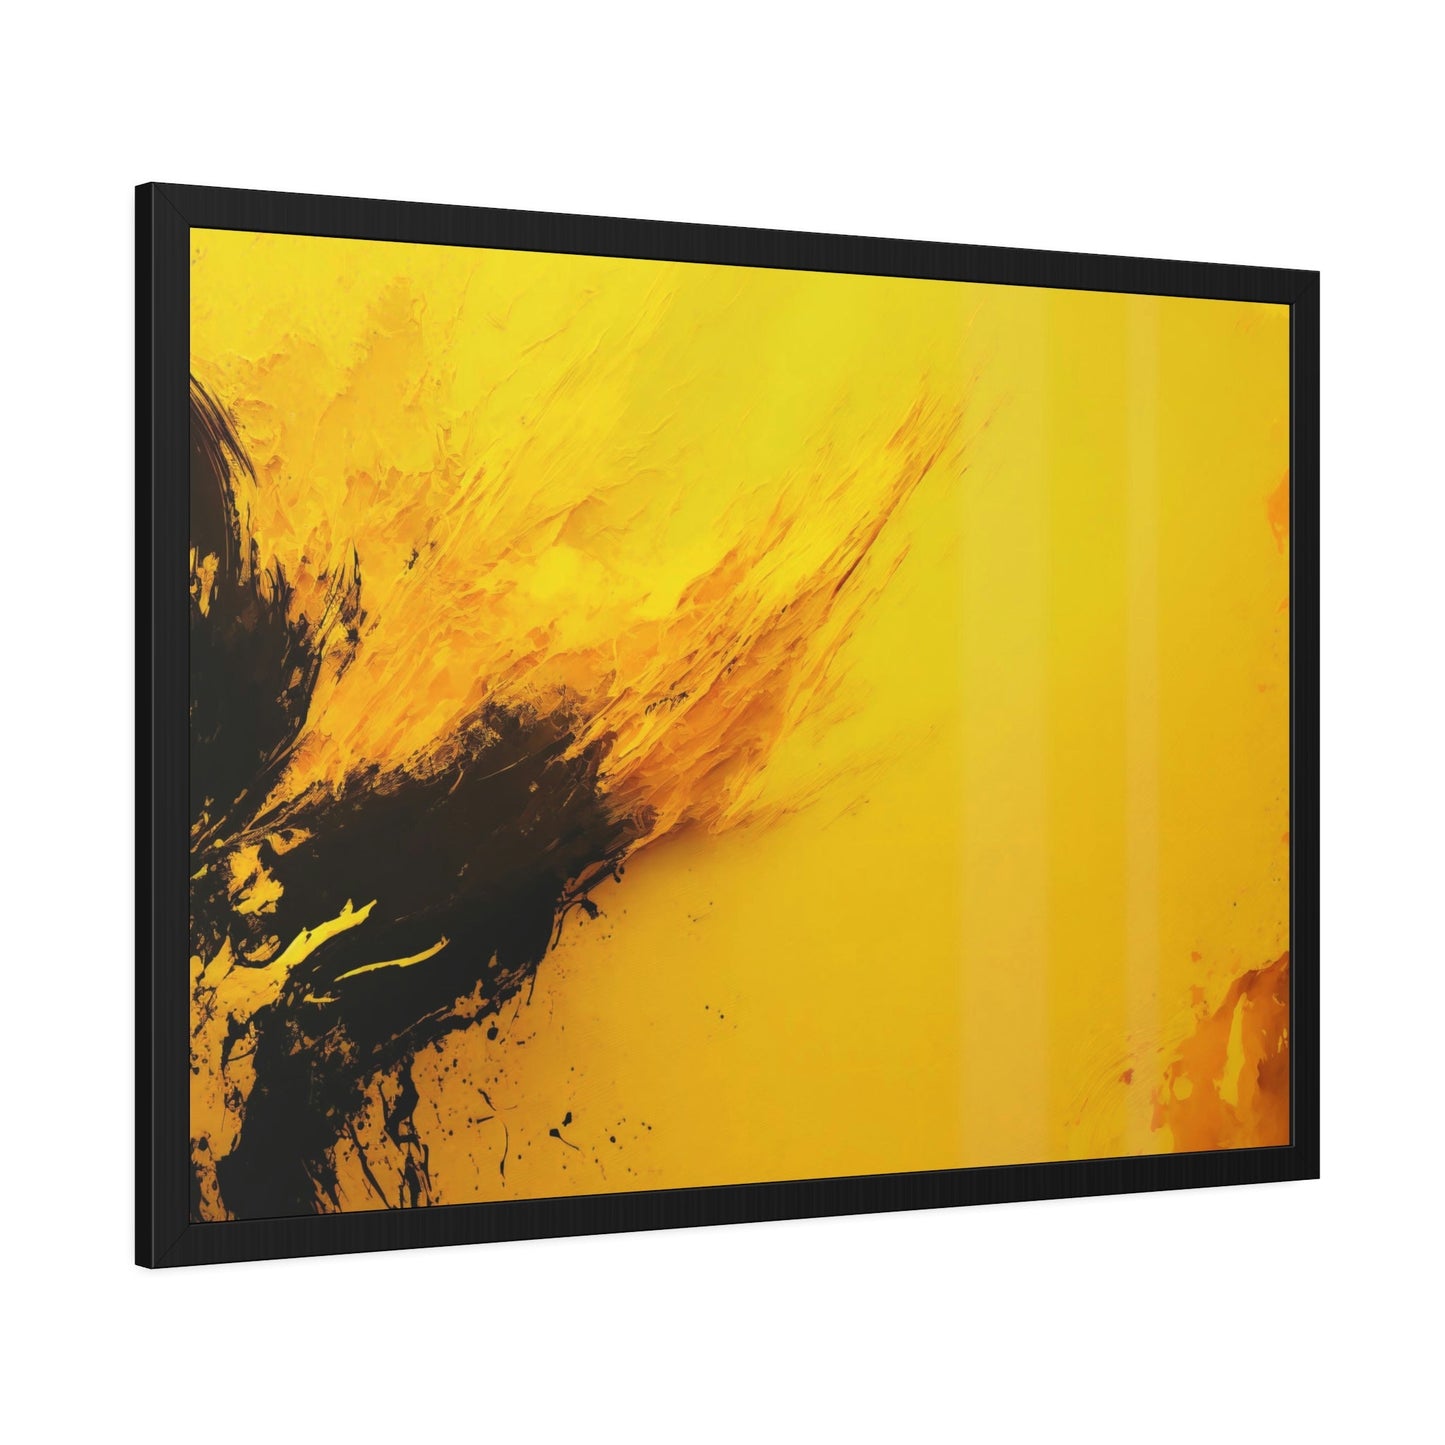 Sunny Abstraction: Bright and Playful Wall Art Prints Featuring a Yellow Abstract Design on Framed Canvas & Poster